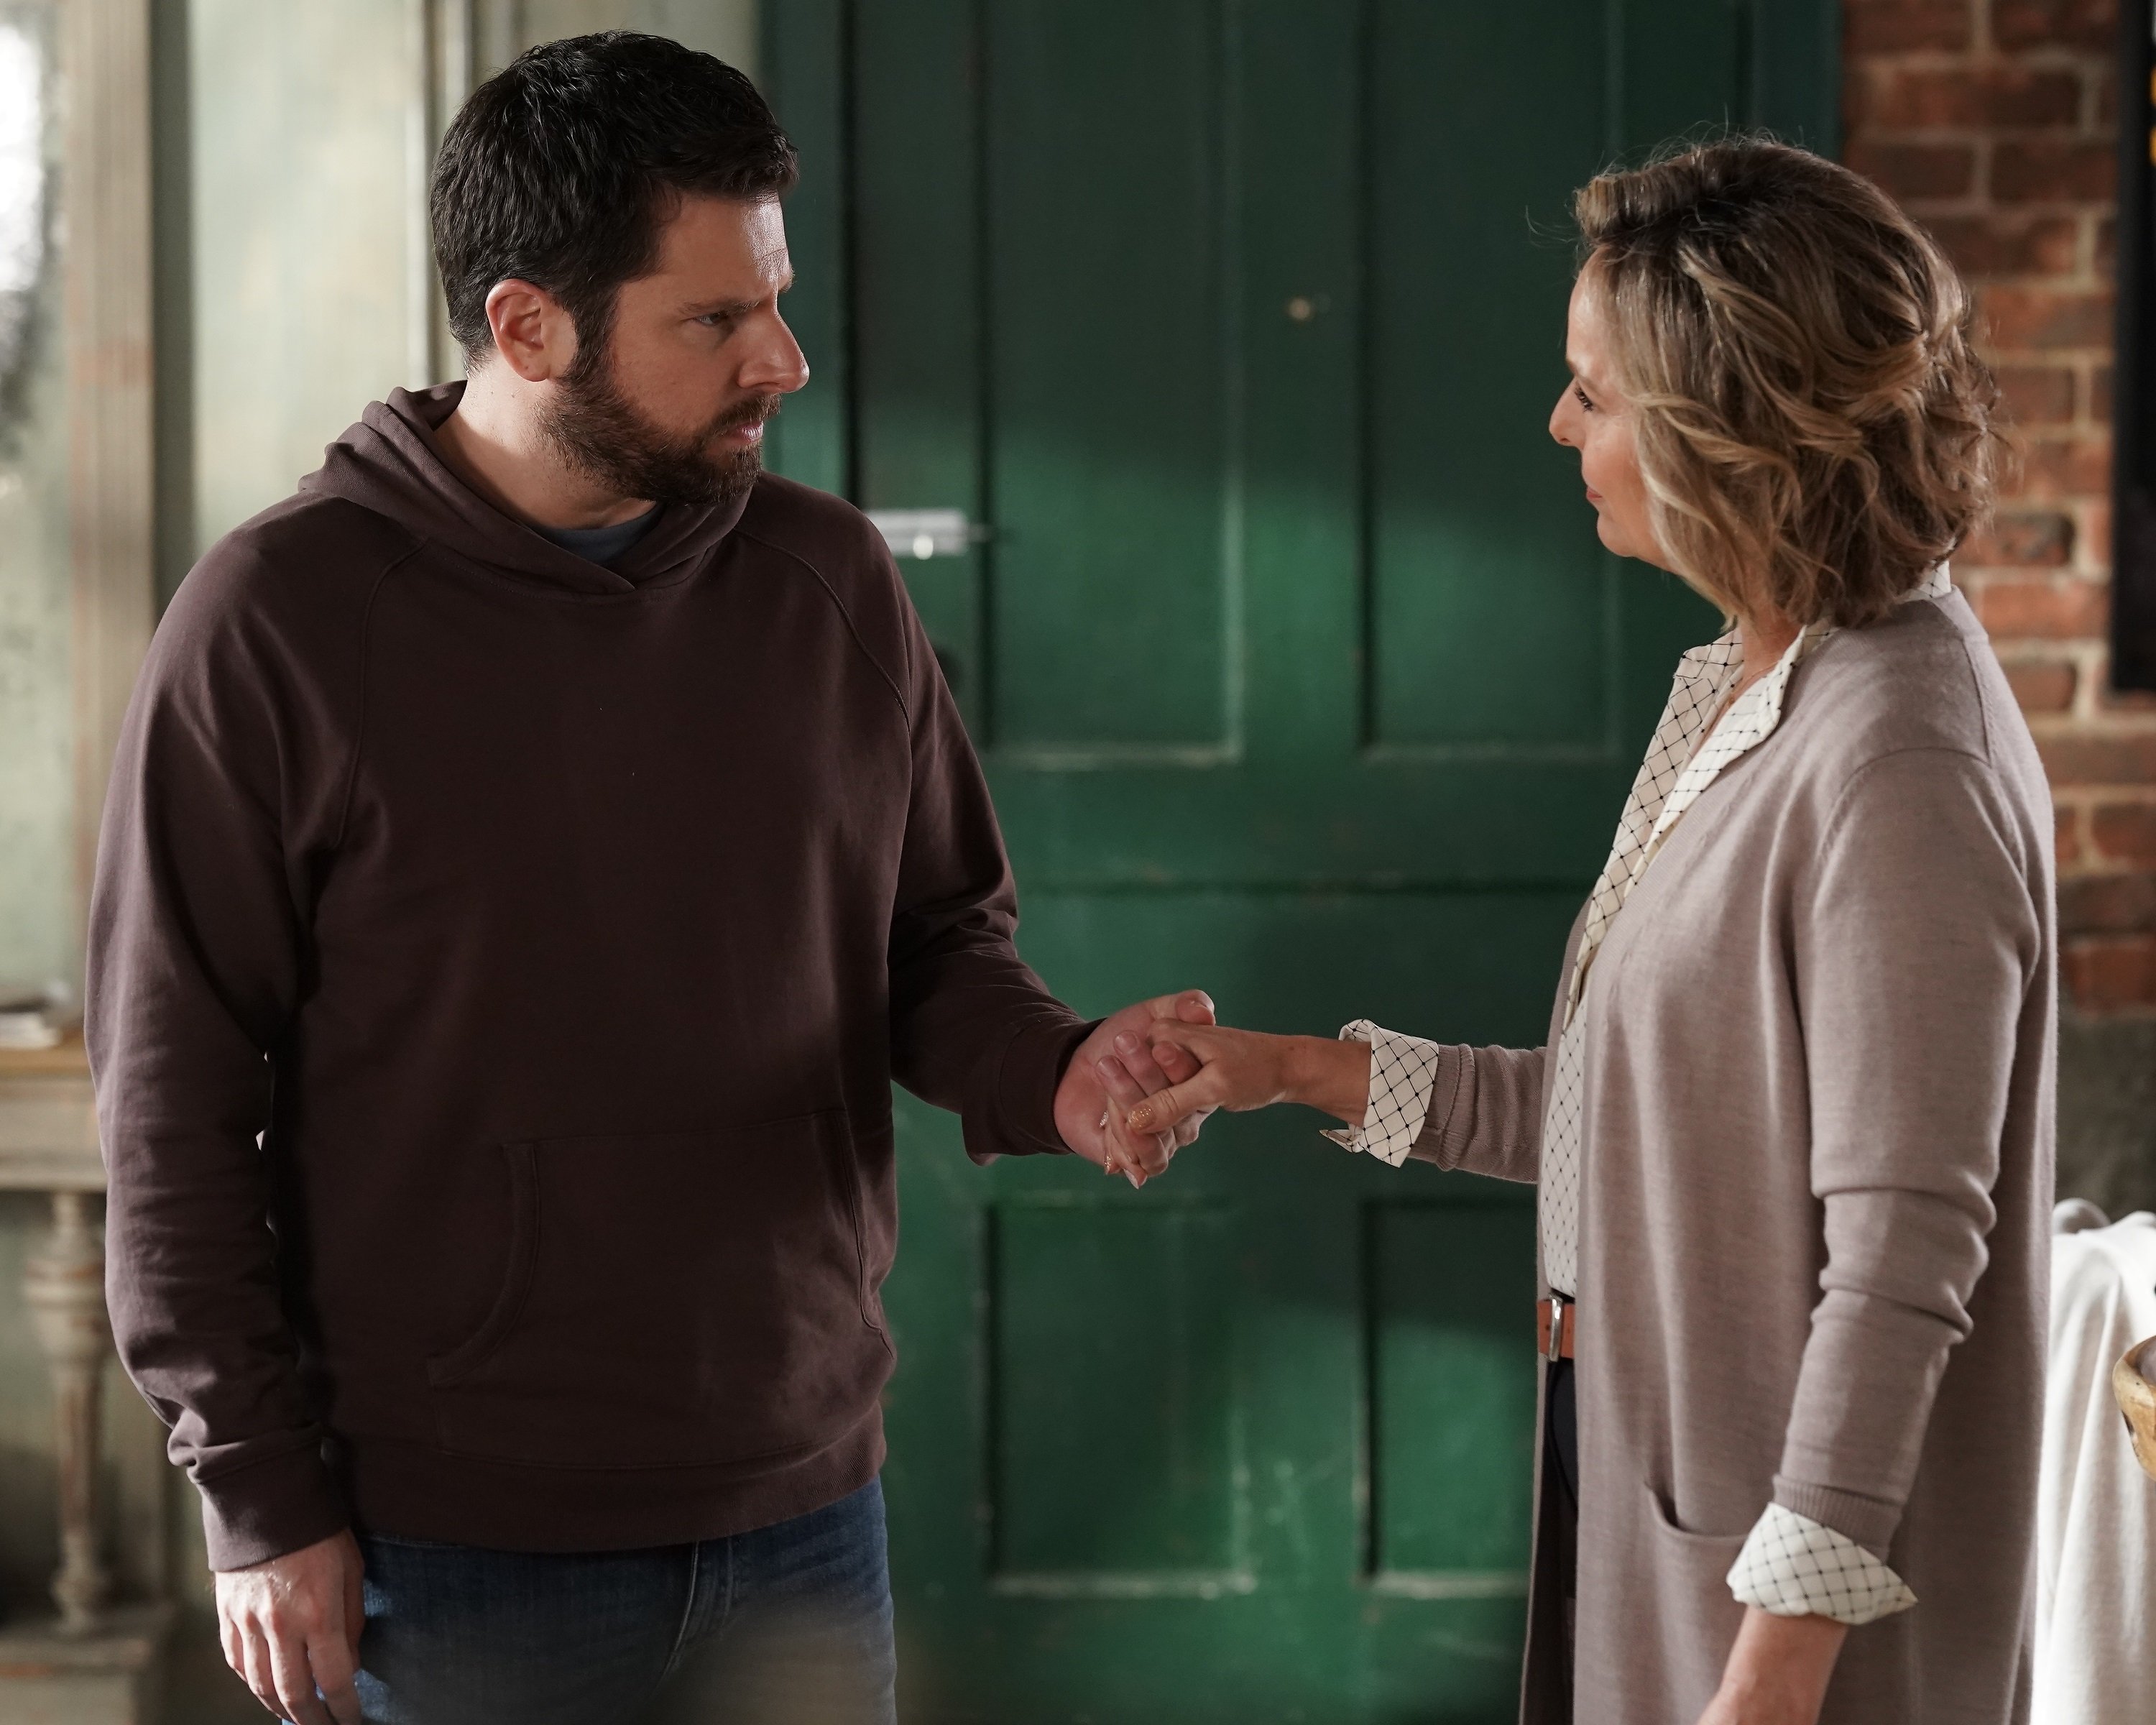 'A Million Little Things' James Roday Rodriguez holding hands with guest star Melora Hardin